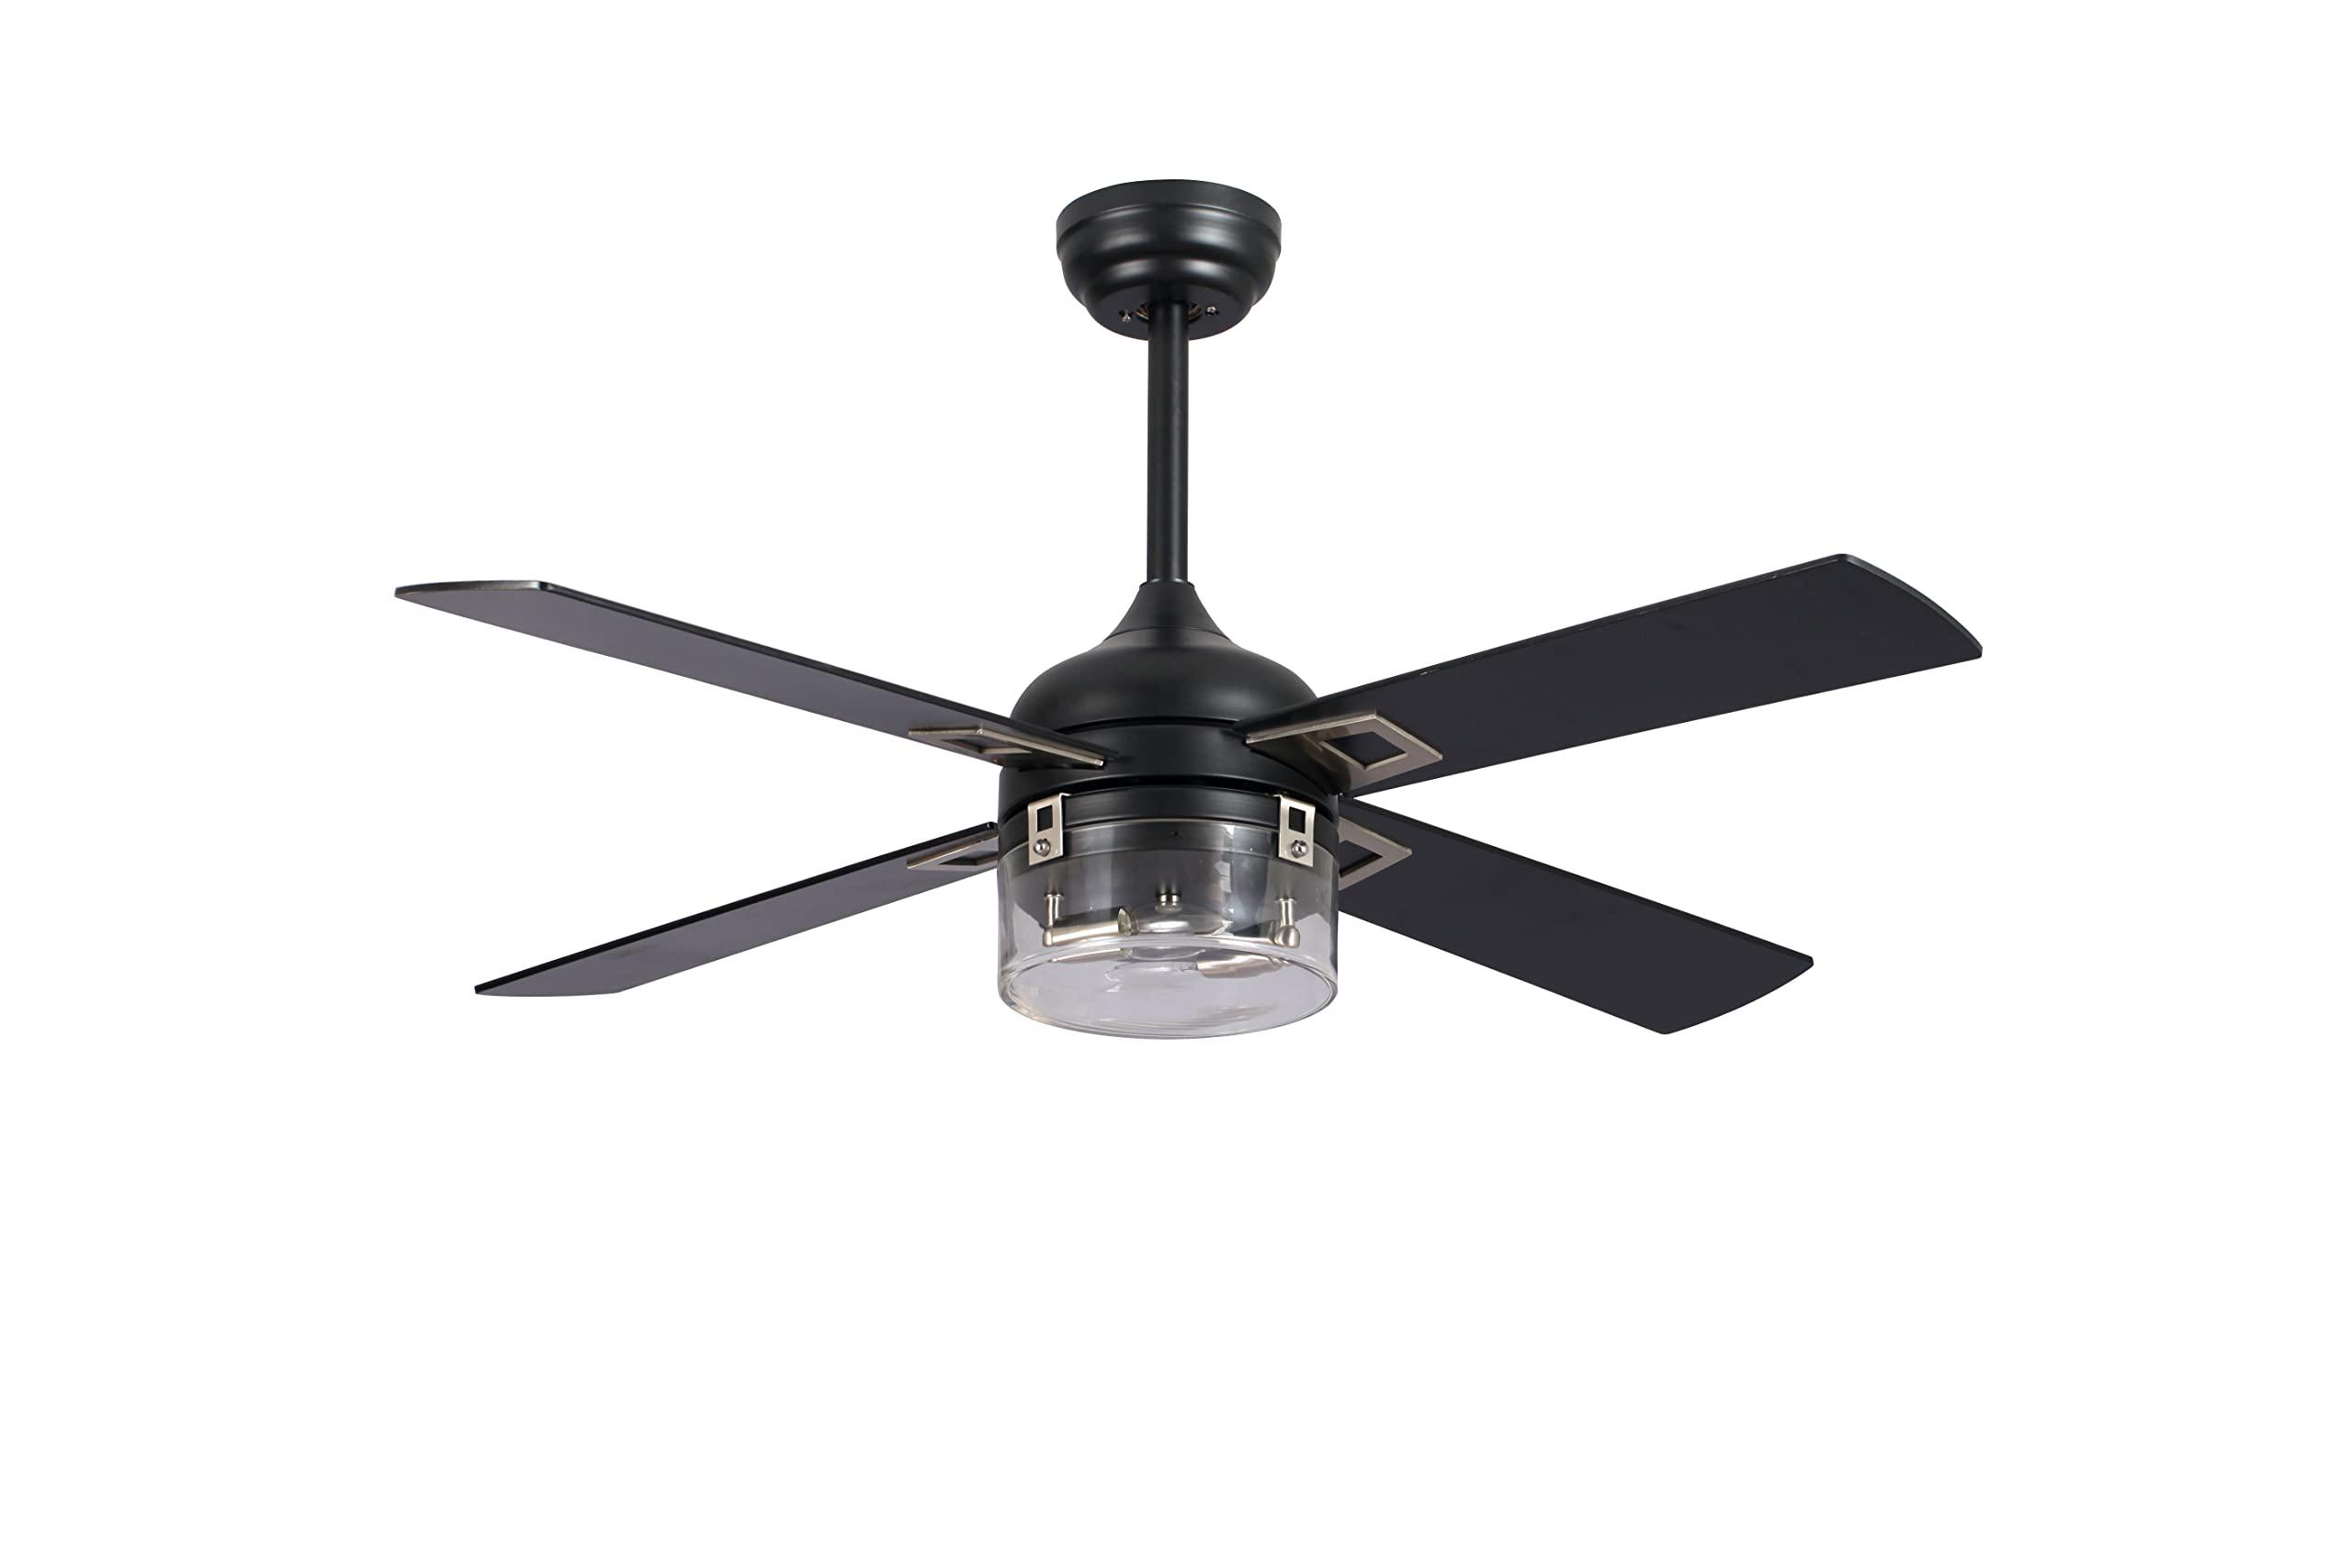 jese 48 inch low profile ceiling fan with led light and remote control,ceiling fan with 4 blades, ac motor, matte black